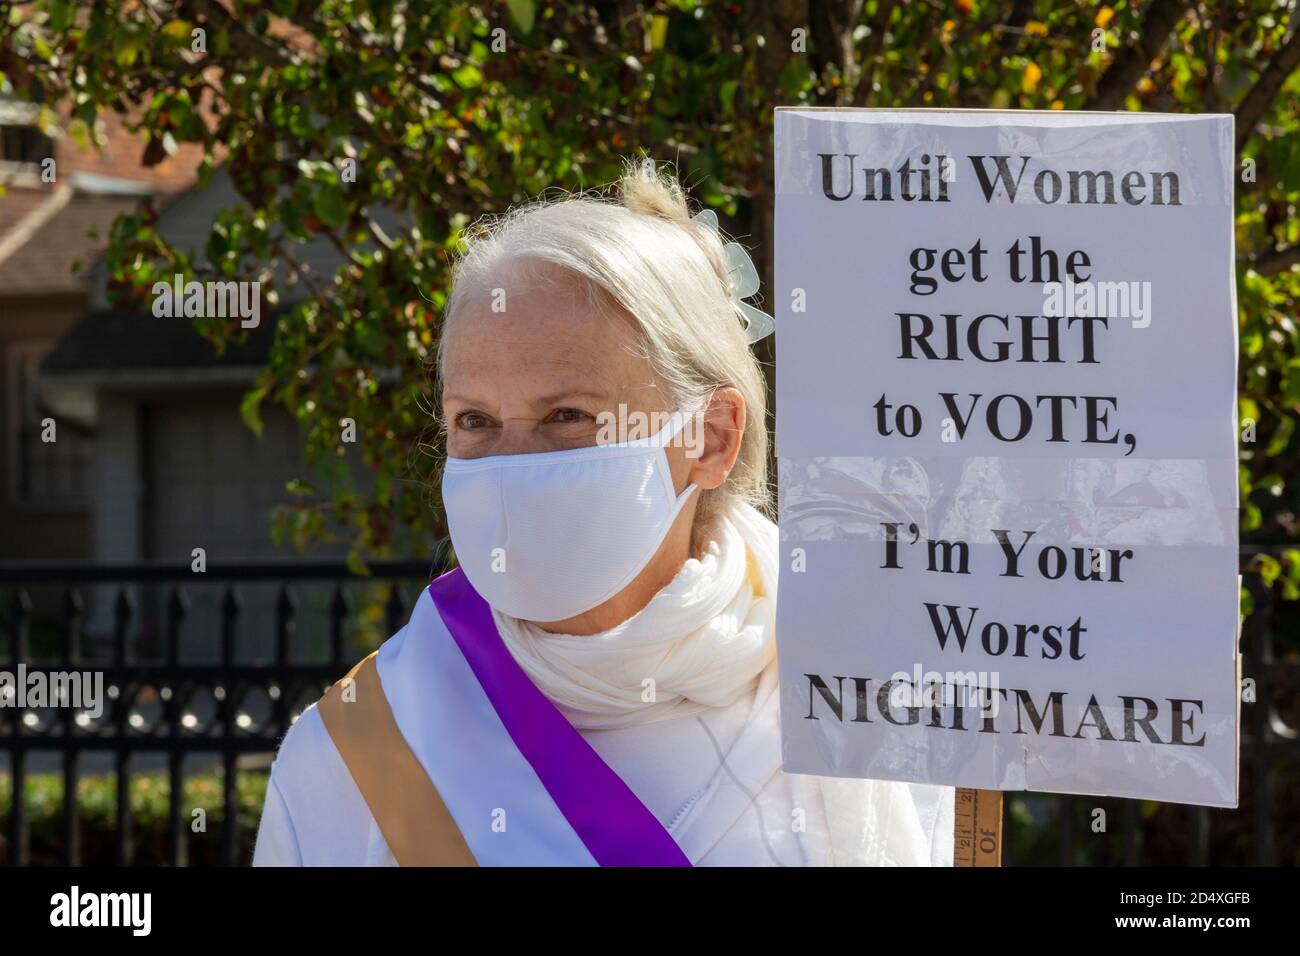 Grosse Pointe, Michigan, USA. 11th Oct, 2020. A parade marks the 100th anniversary of women winning the right to vote. The parade was organized by the American Association of University Women. Credit: Jim West/Alamy Live News Stock Photo